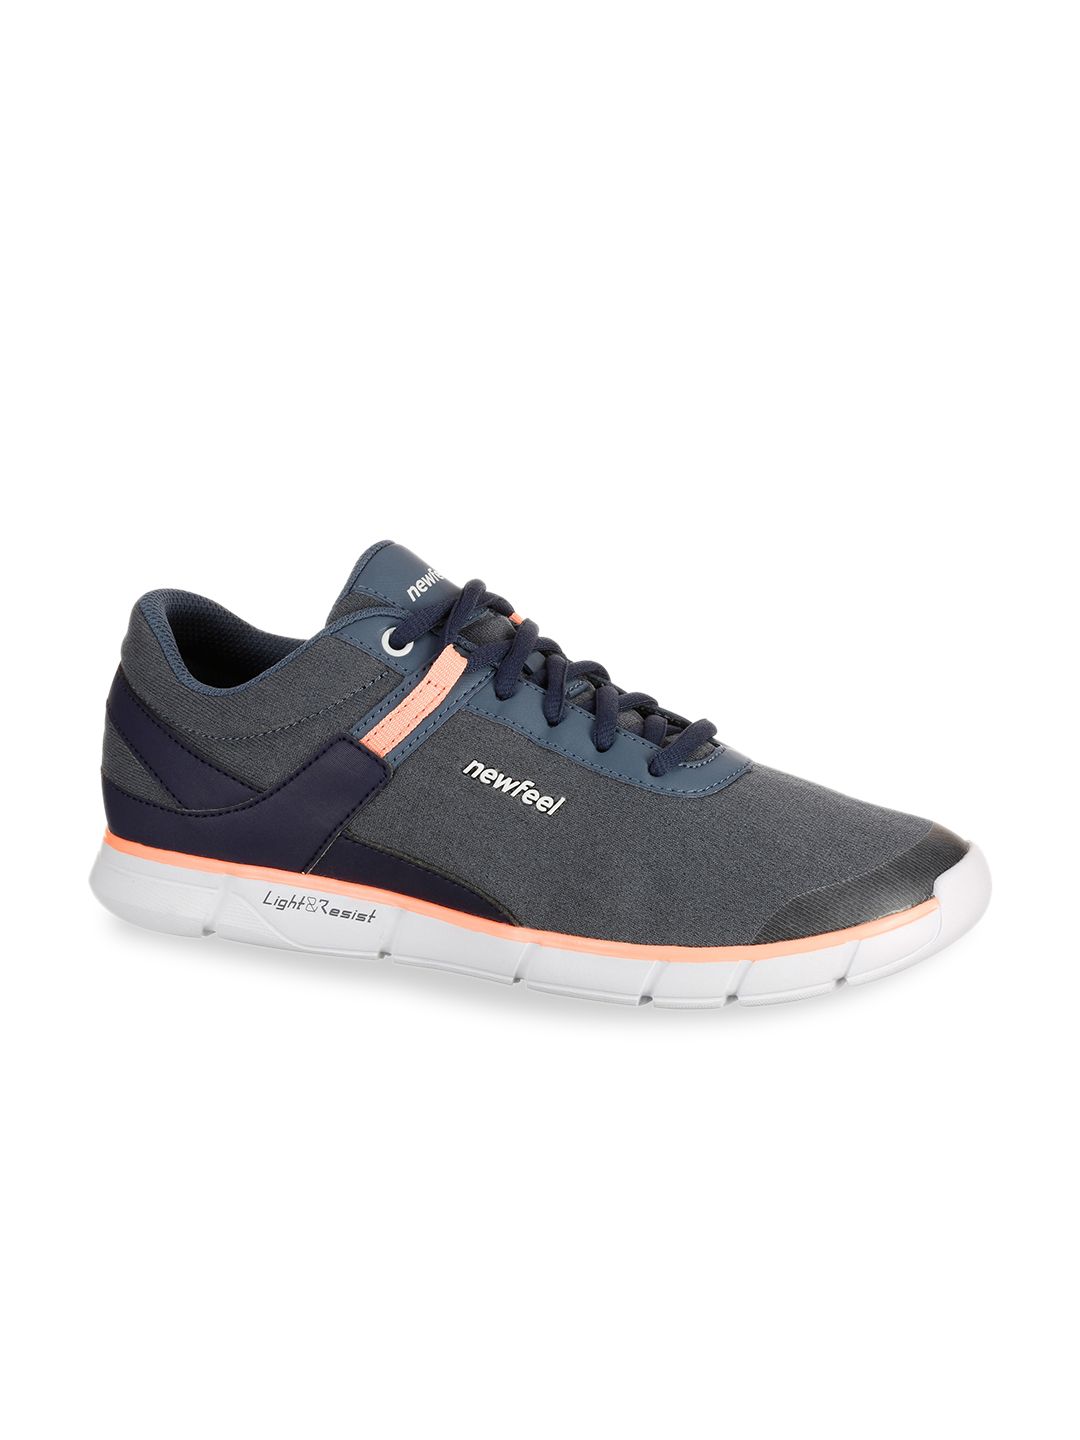 Newfeel By Decathlon Women Blue Textile Walking Non-Marking Shoes Price in India